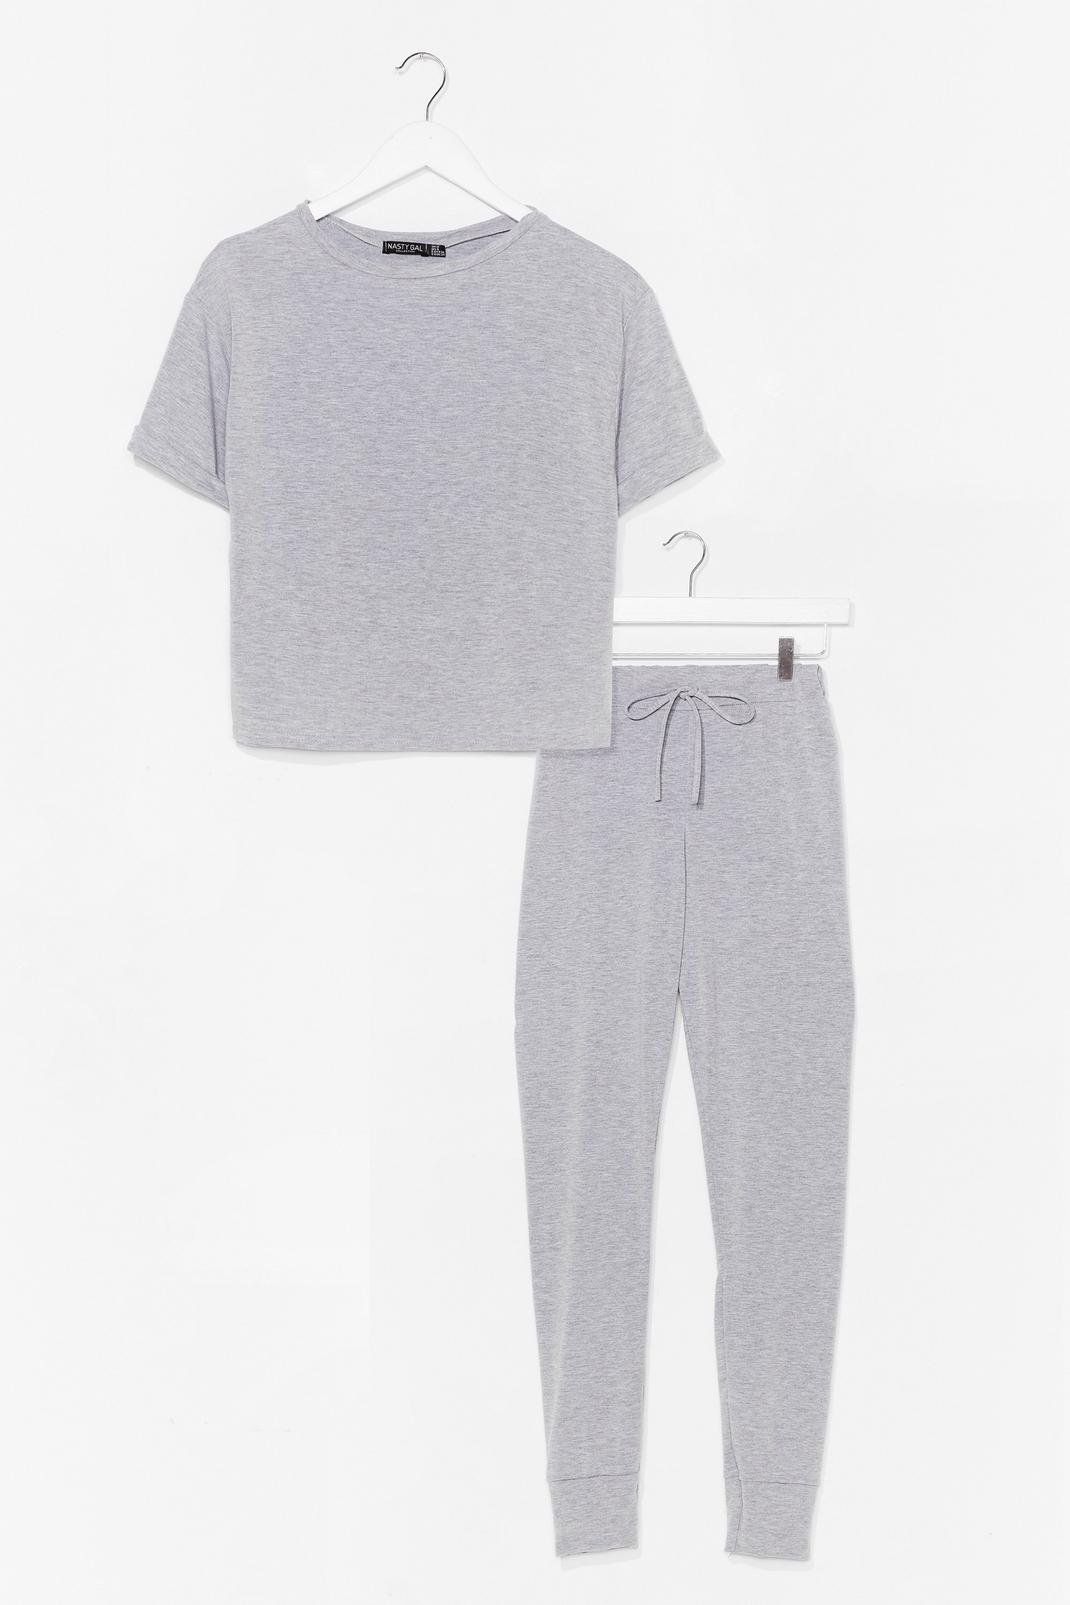 Grey marl T-Shirt and Fitted Sweatpants Pajama Set image number 1